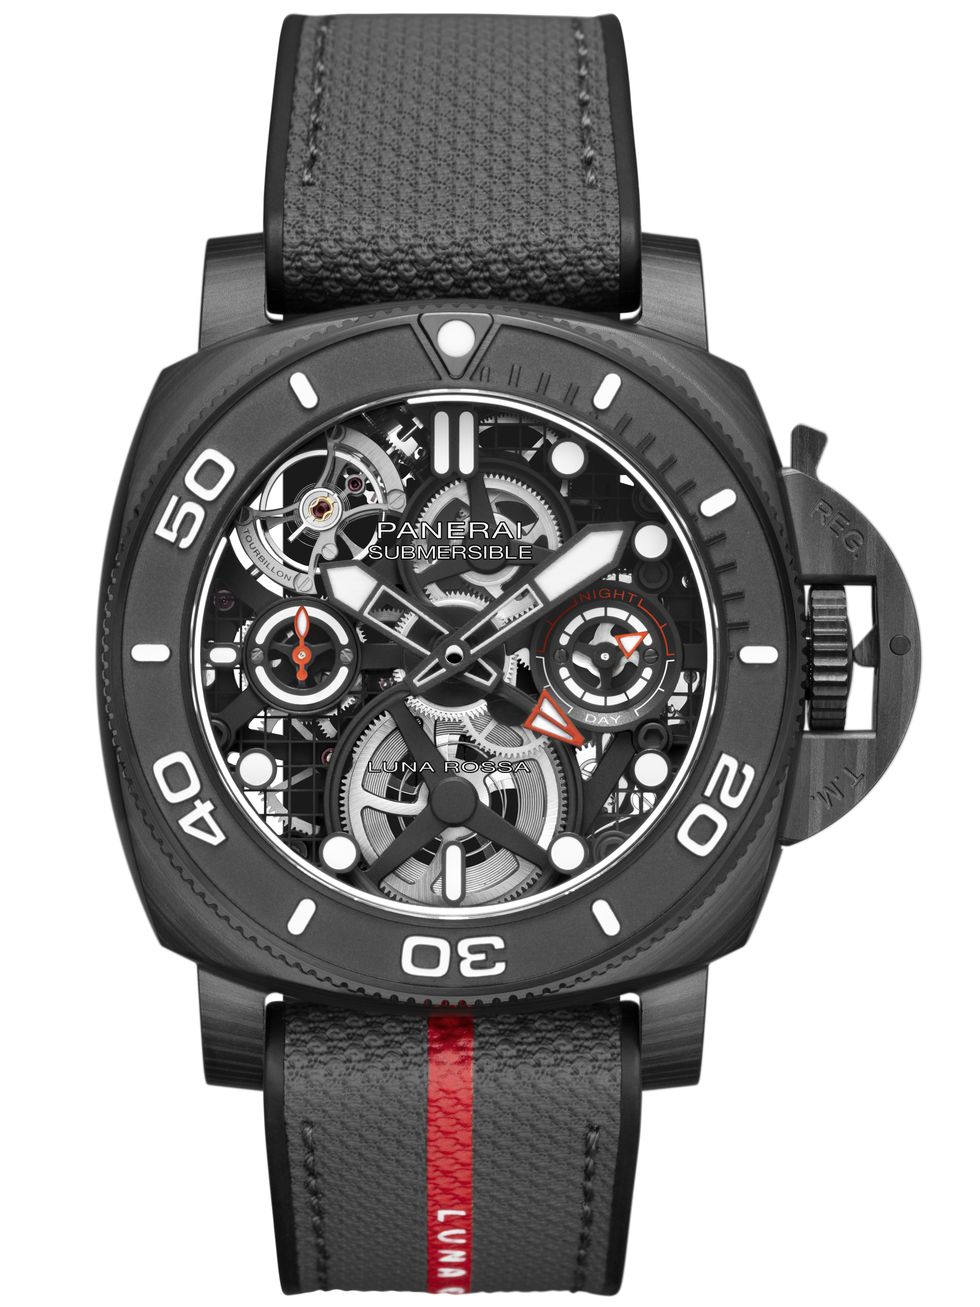 the pam01405 submersible tourbillon gmt luna rossa experience edition